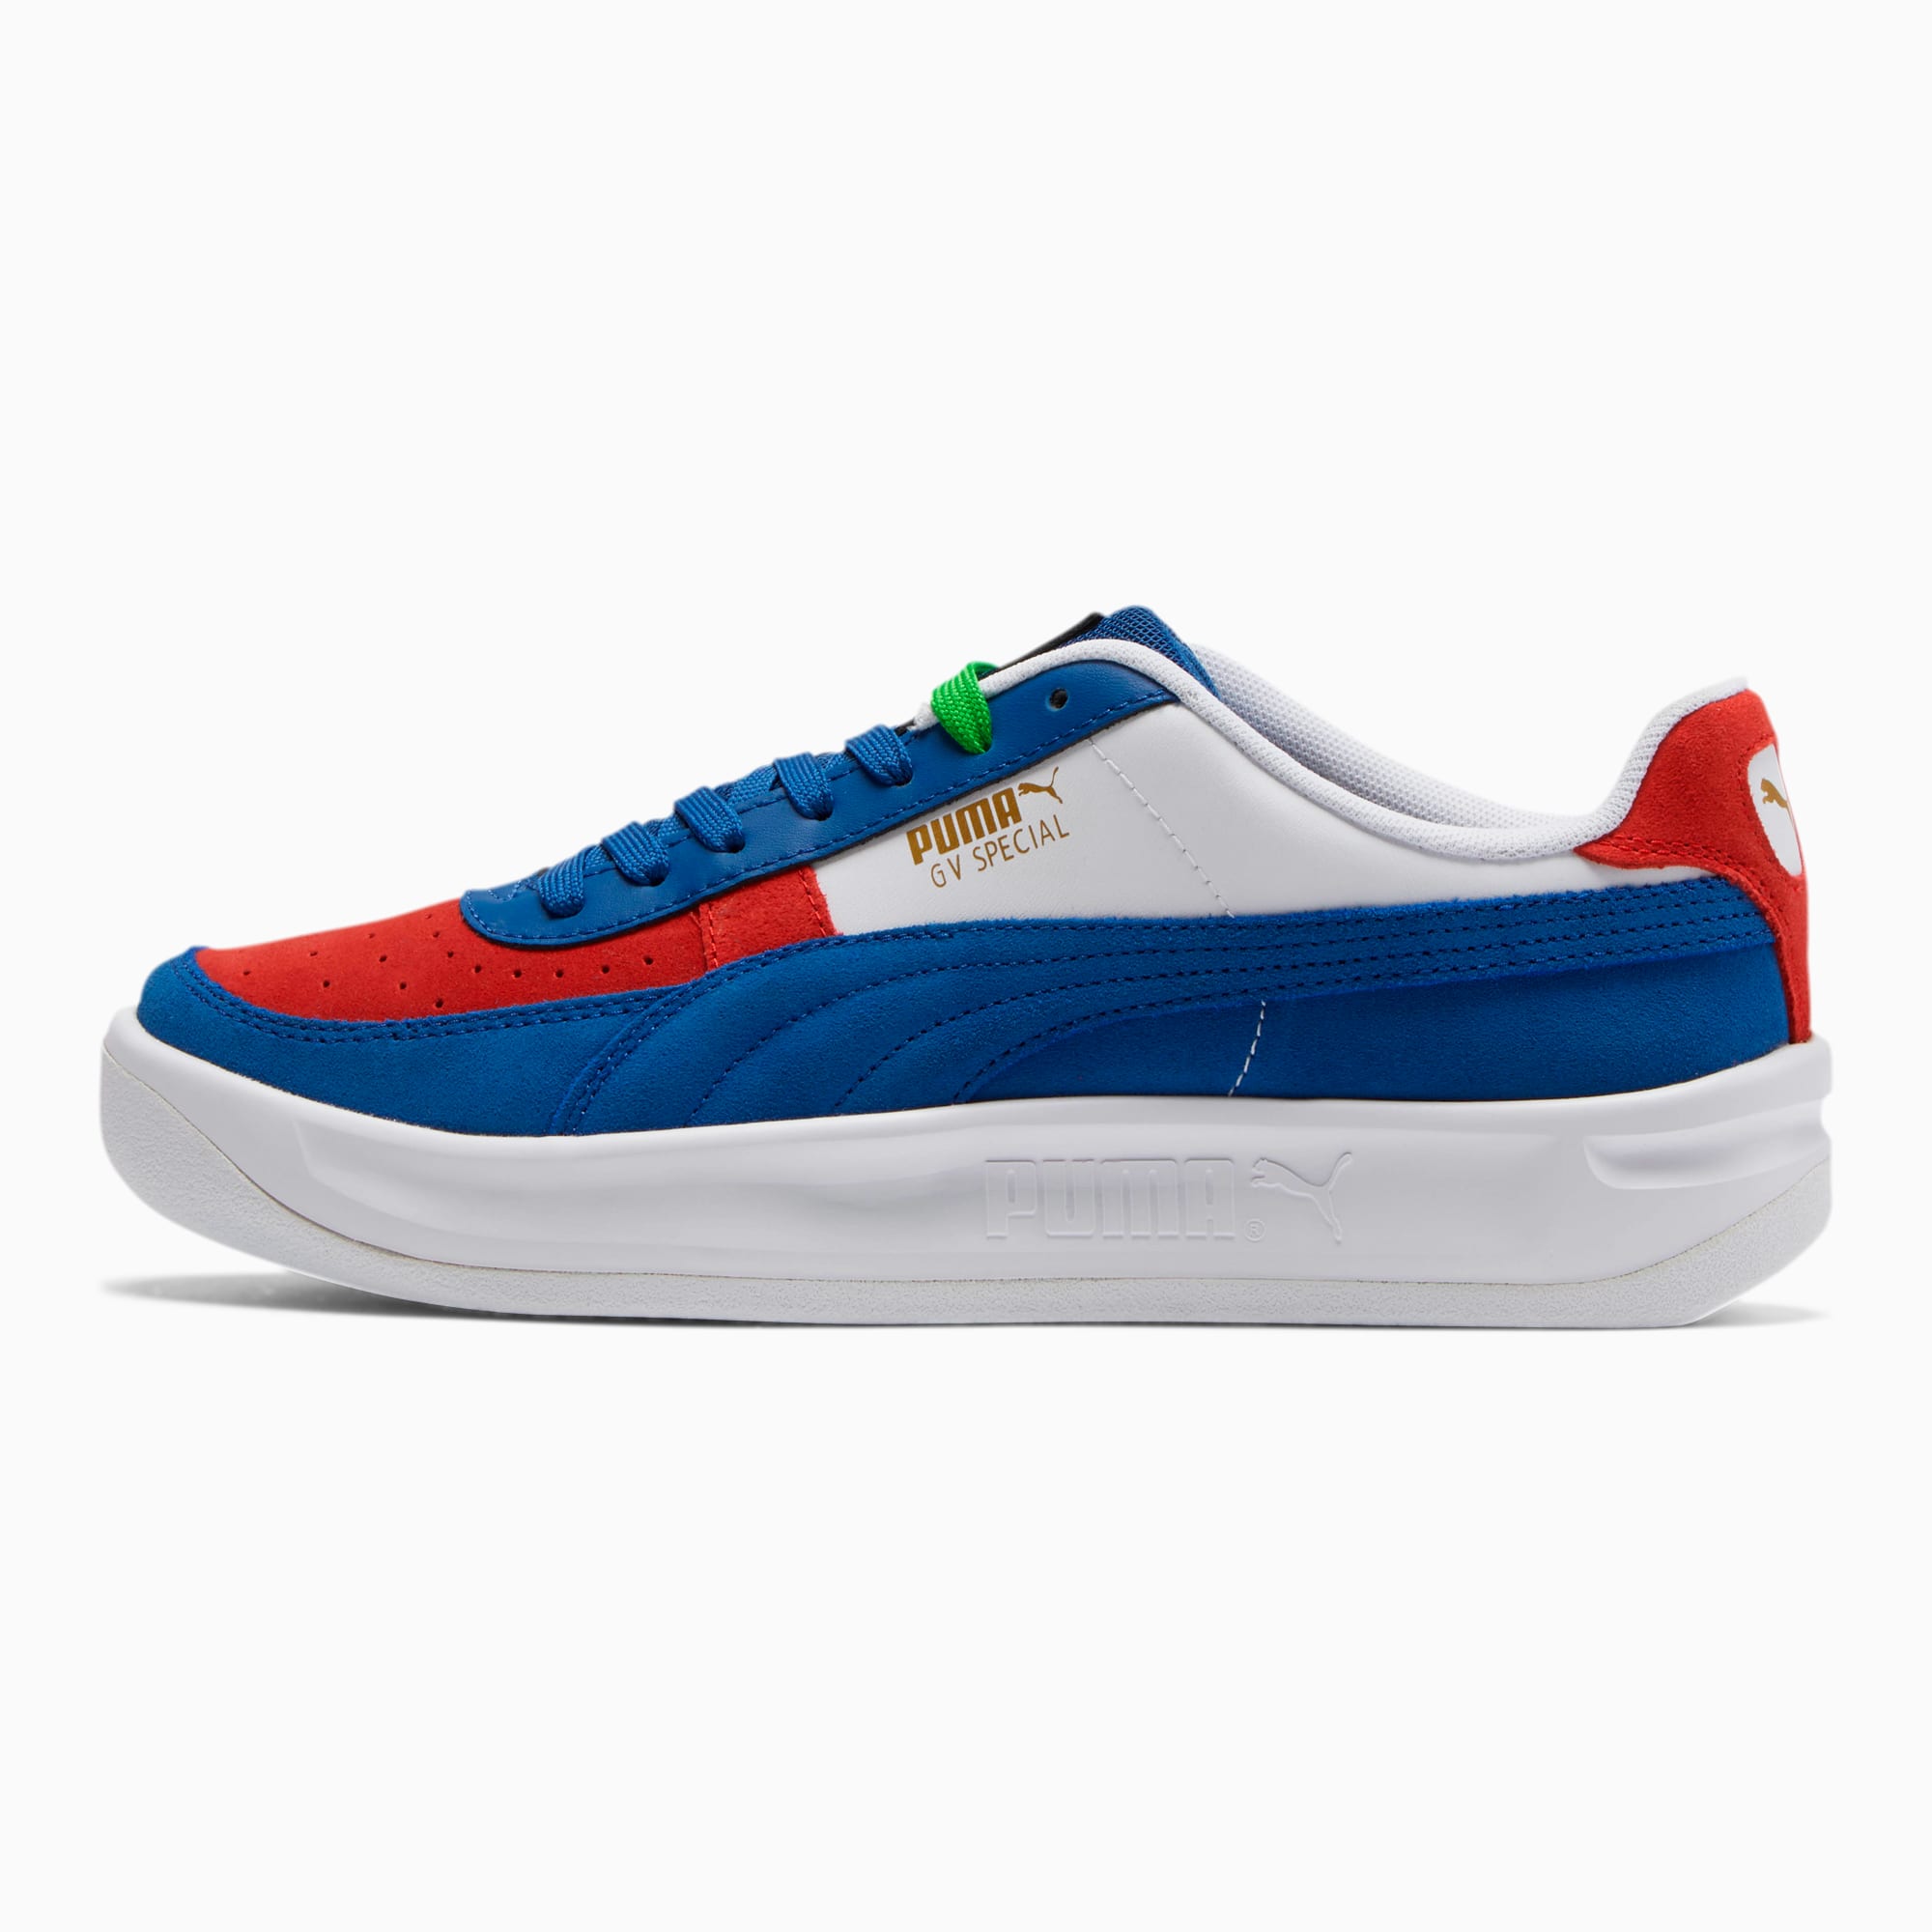 puma red white and blue shoes